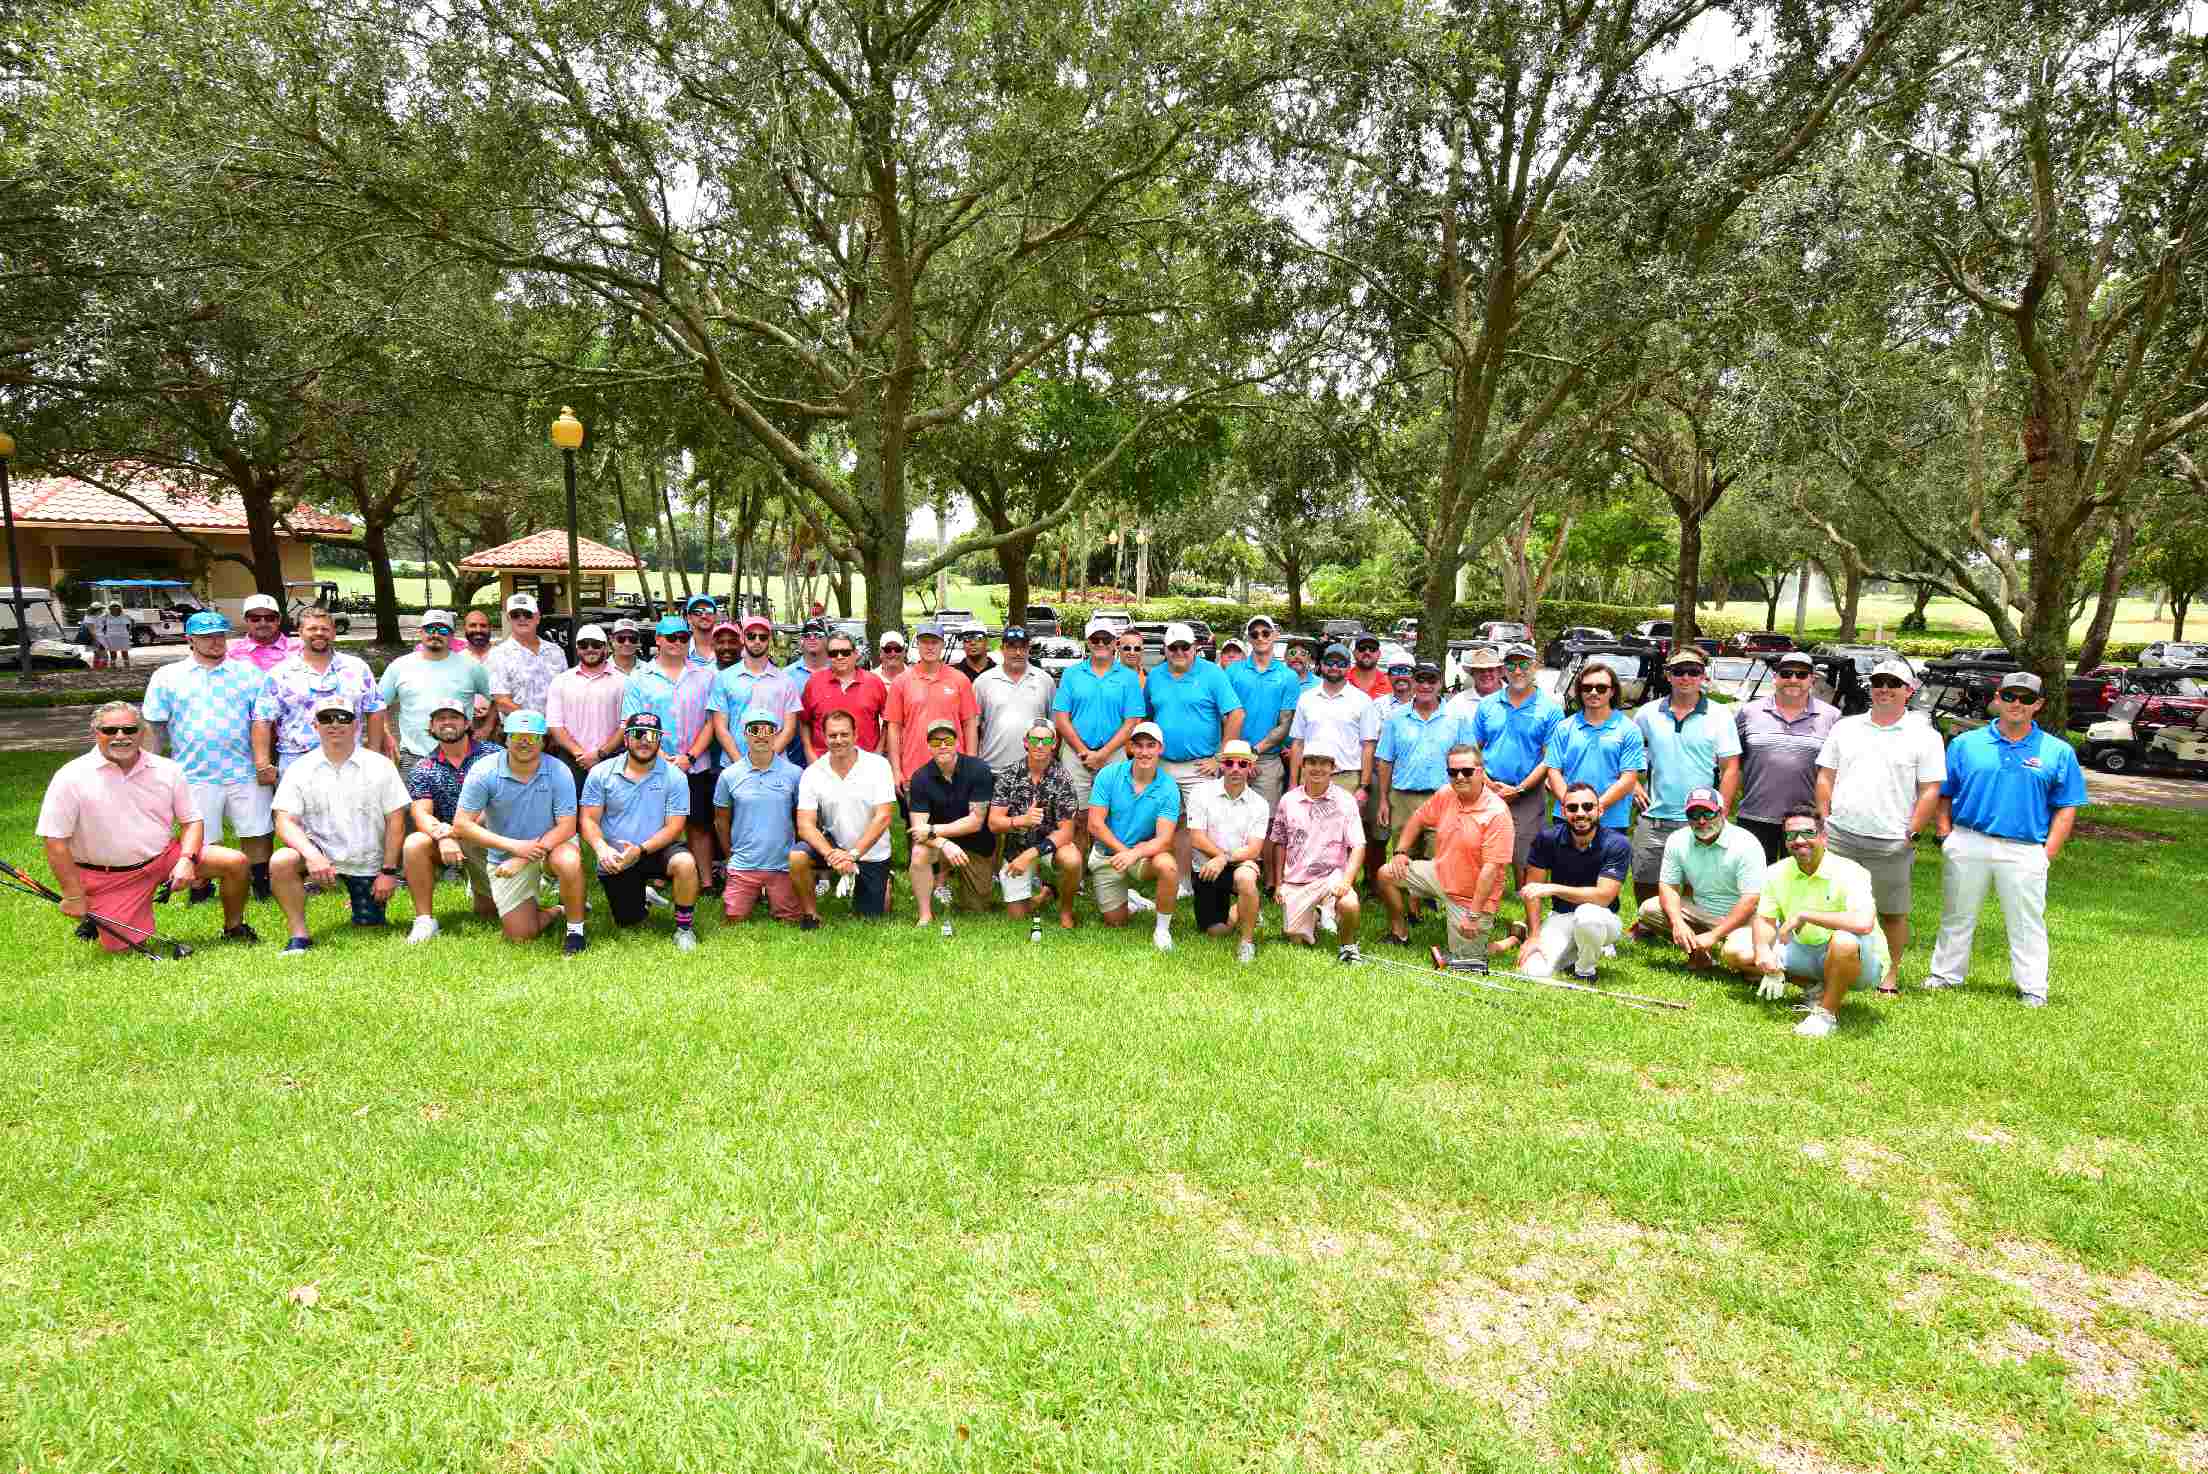 Group photo of golfers